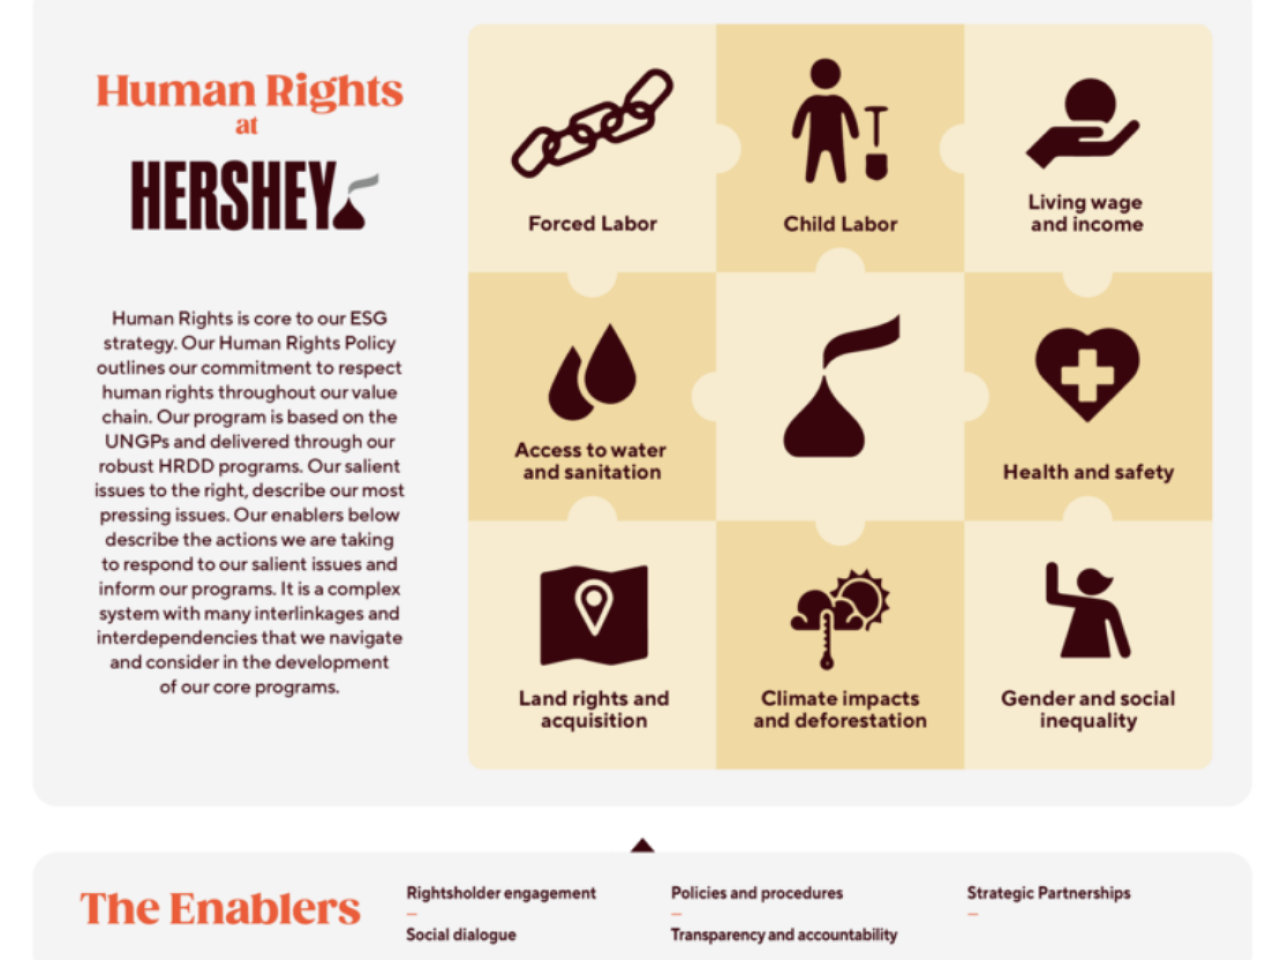 Human Rights at Hershey and The Enablers infographic 